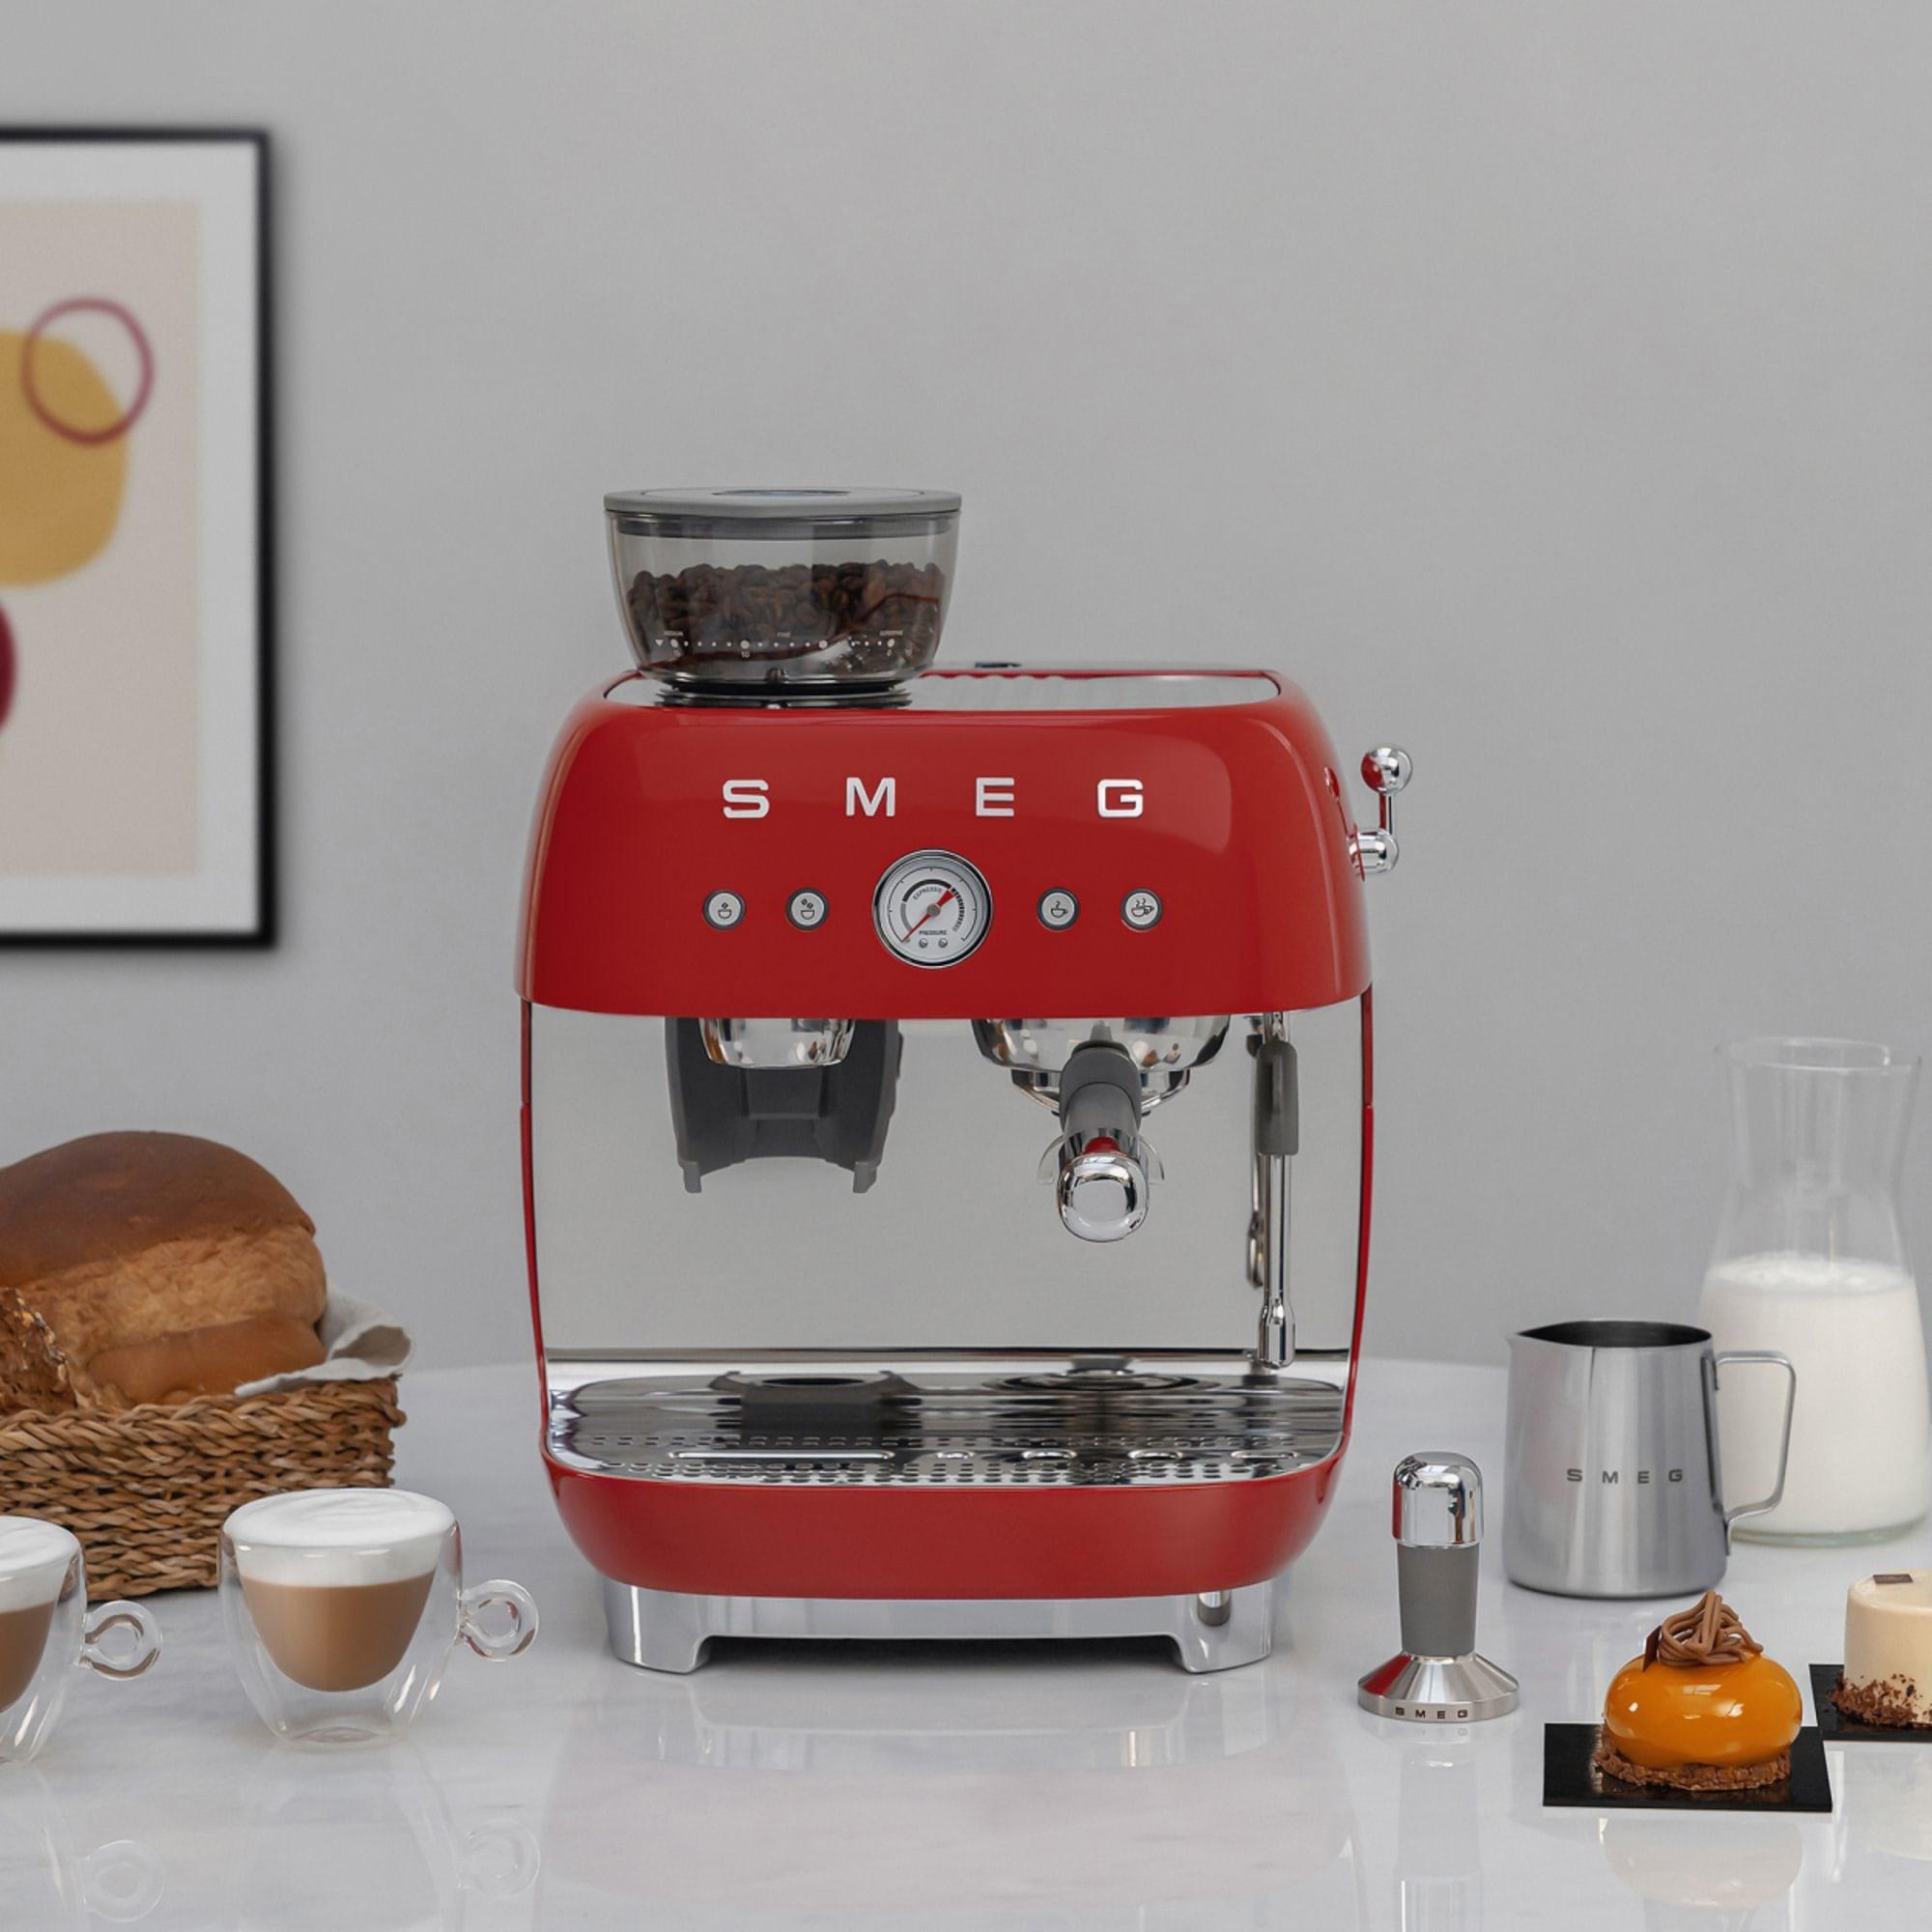 Smeg 50's Retro Style Espresso Machine with Built In Grinder Red Image 12